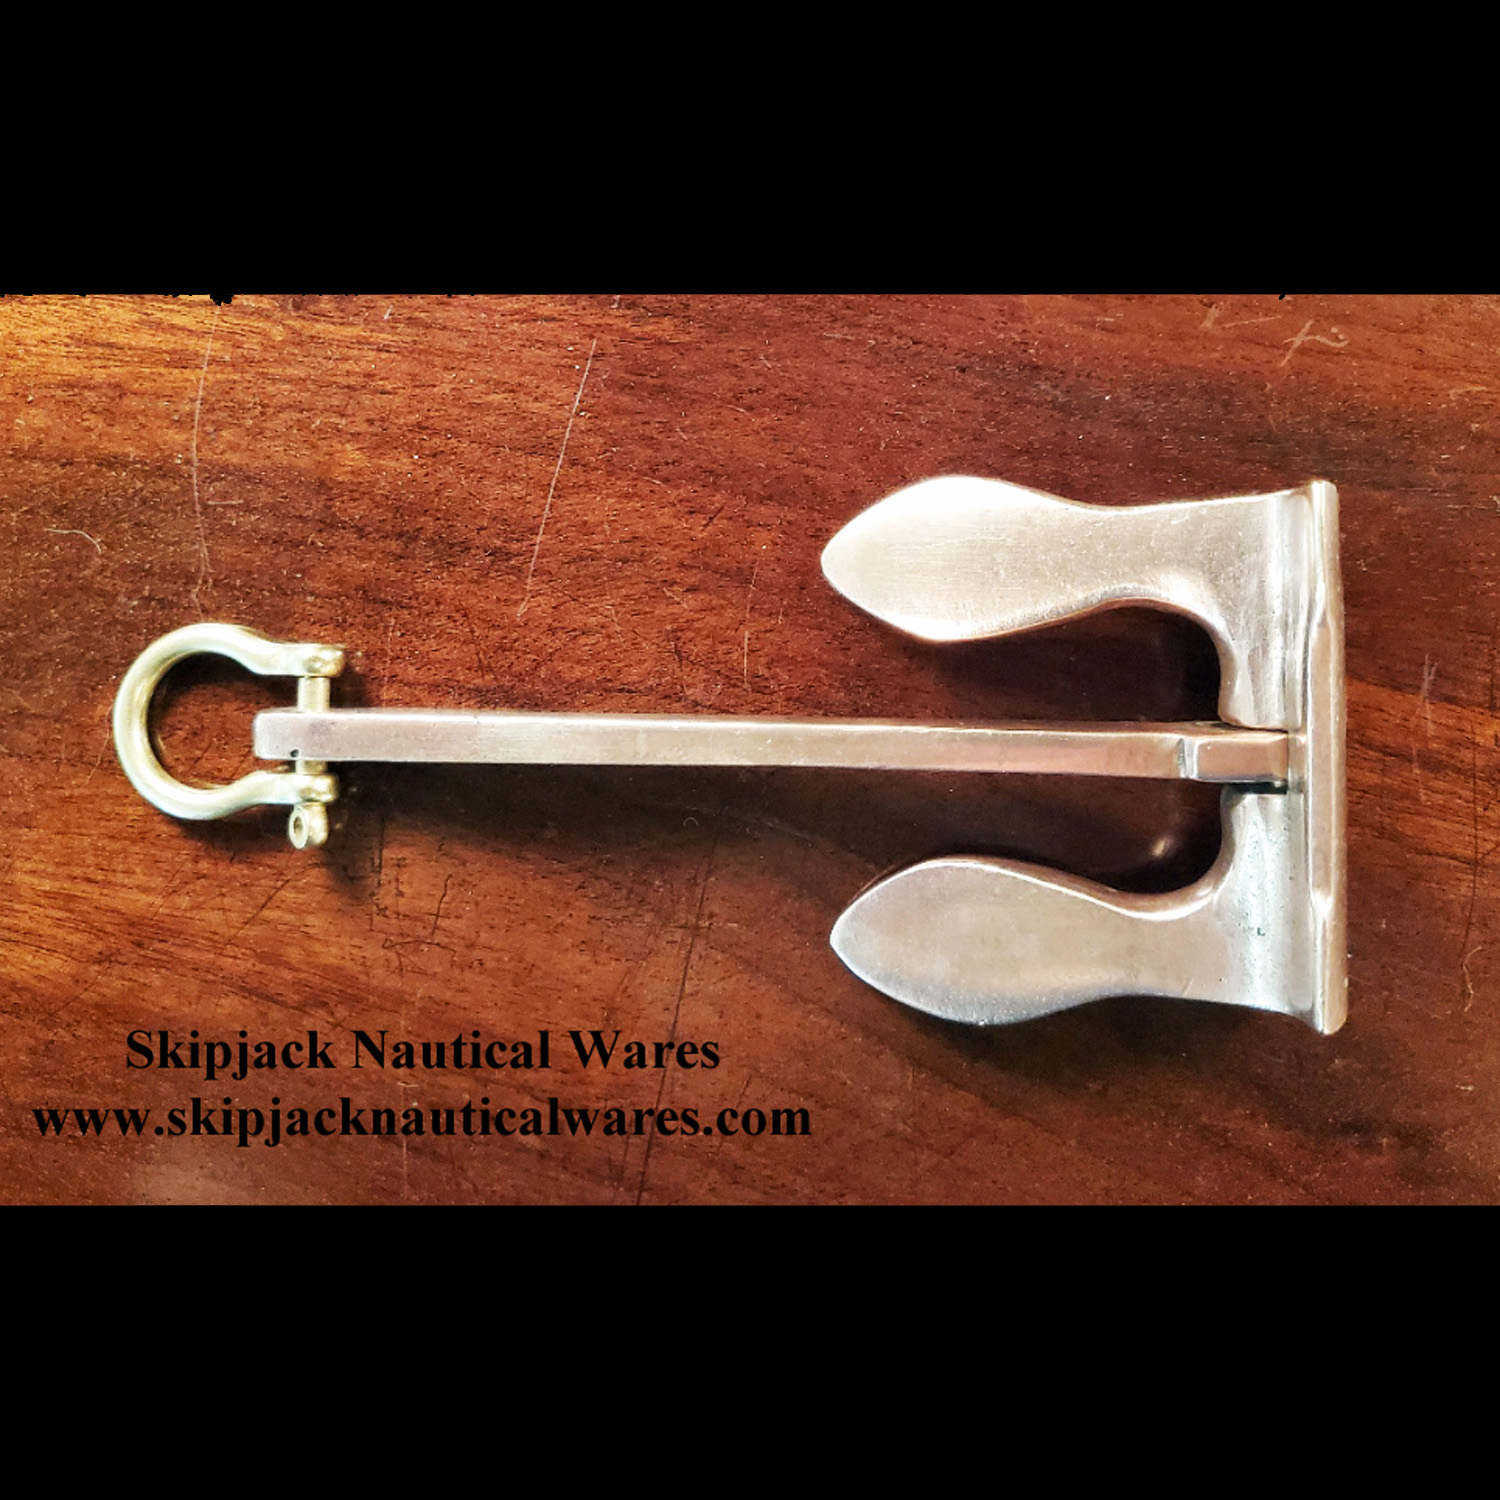 Miniature Brass Stockless Admiralty Anchor: Skipjack Nautical Wares